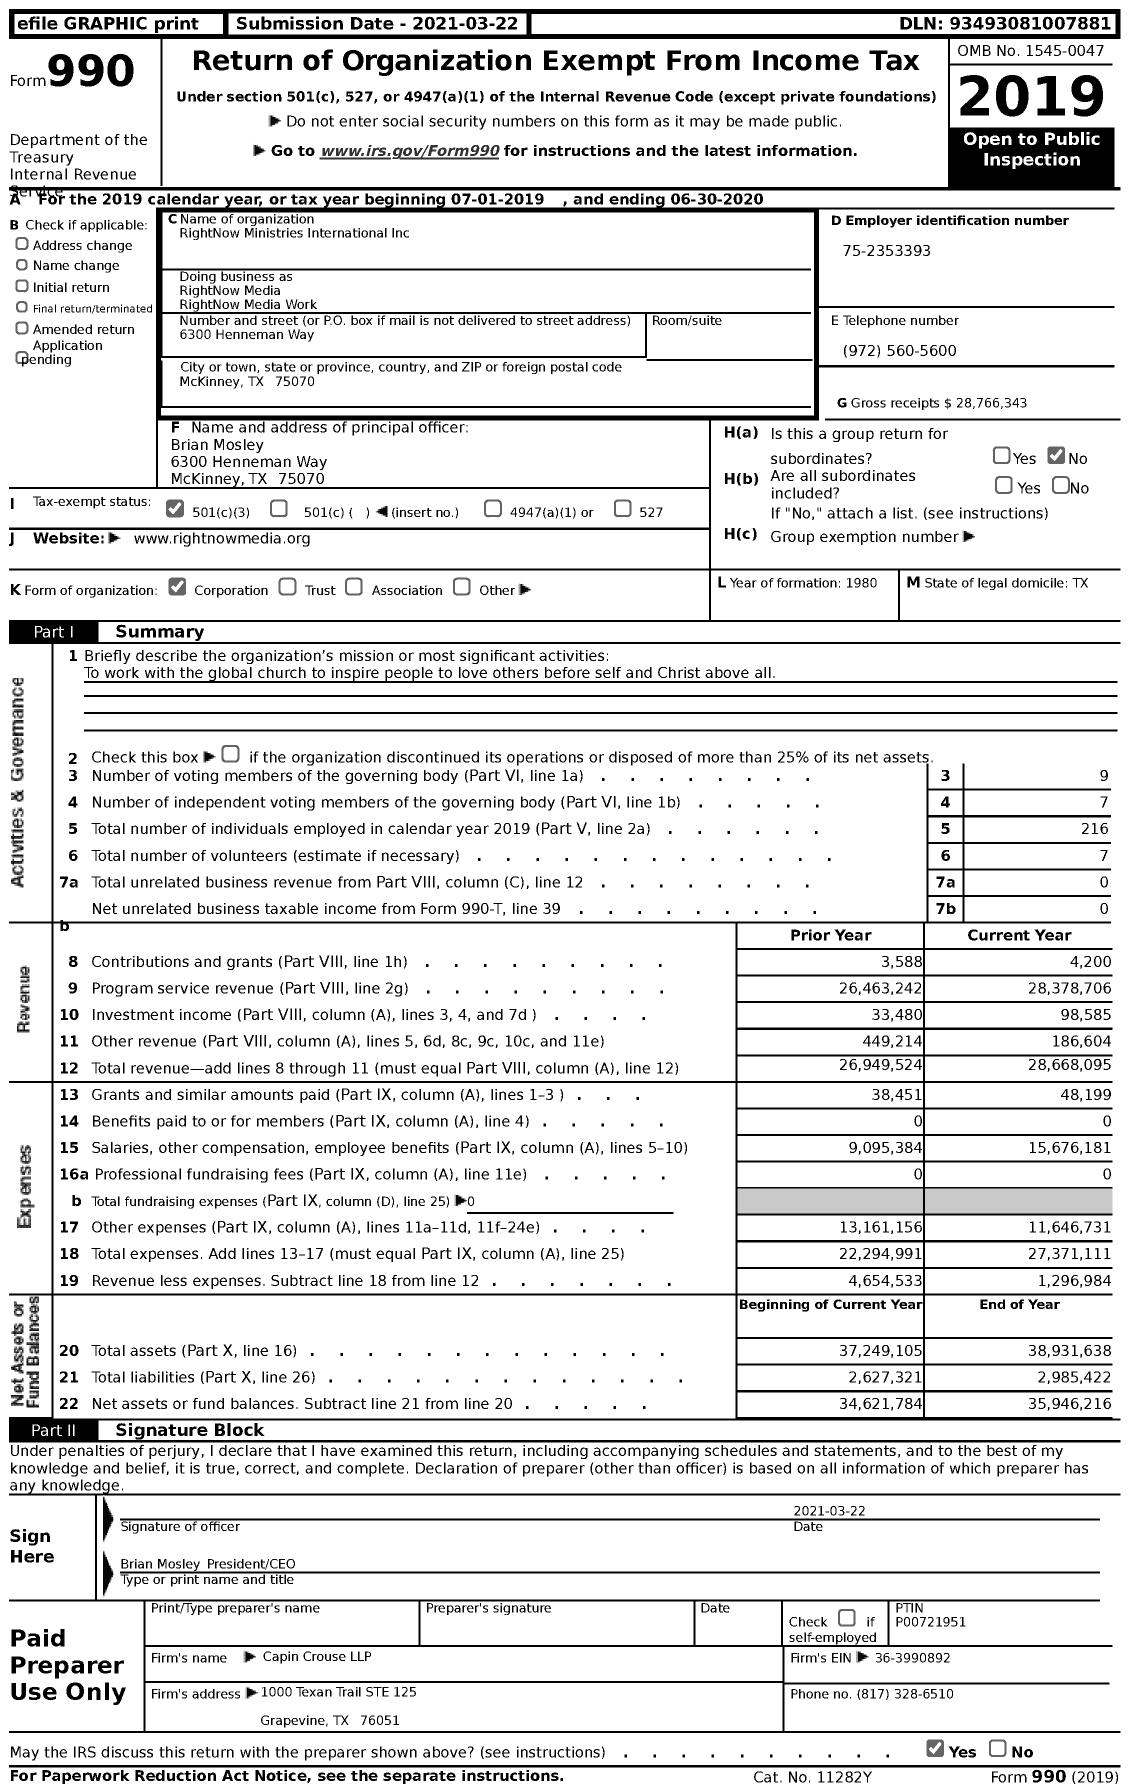 Image of first page of 2019 Form 990 for RightNow Media RightNow Media Work